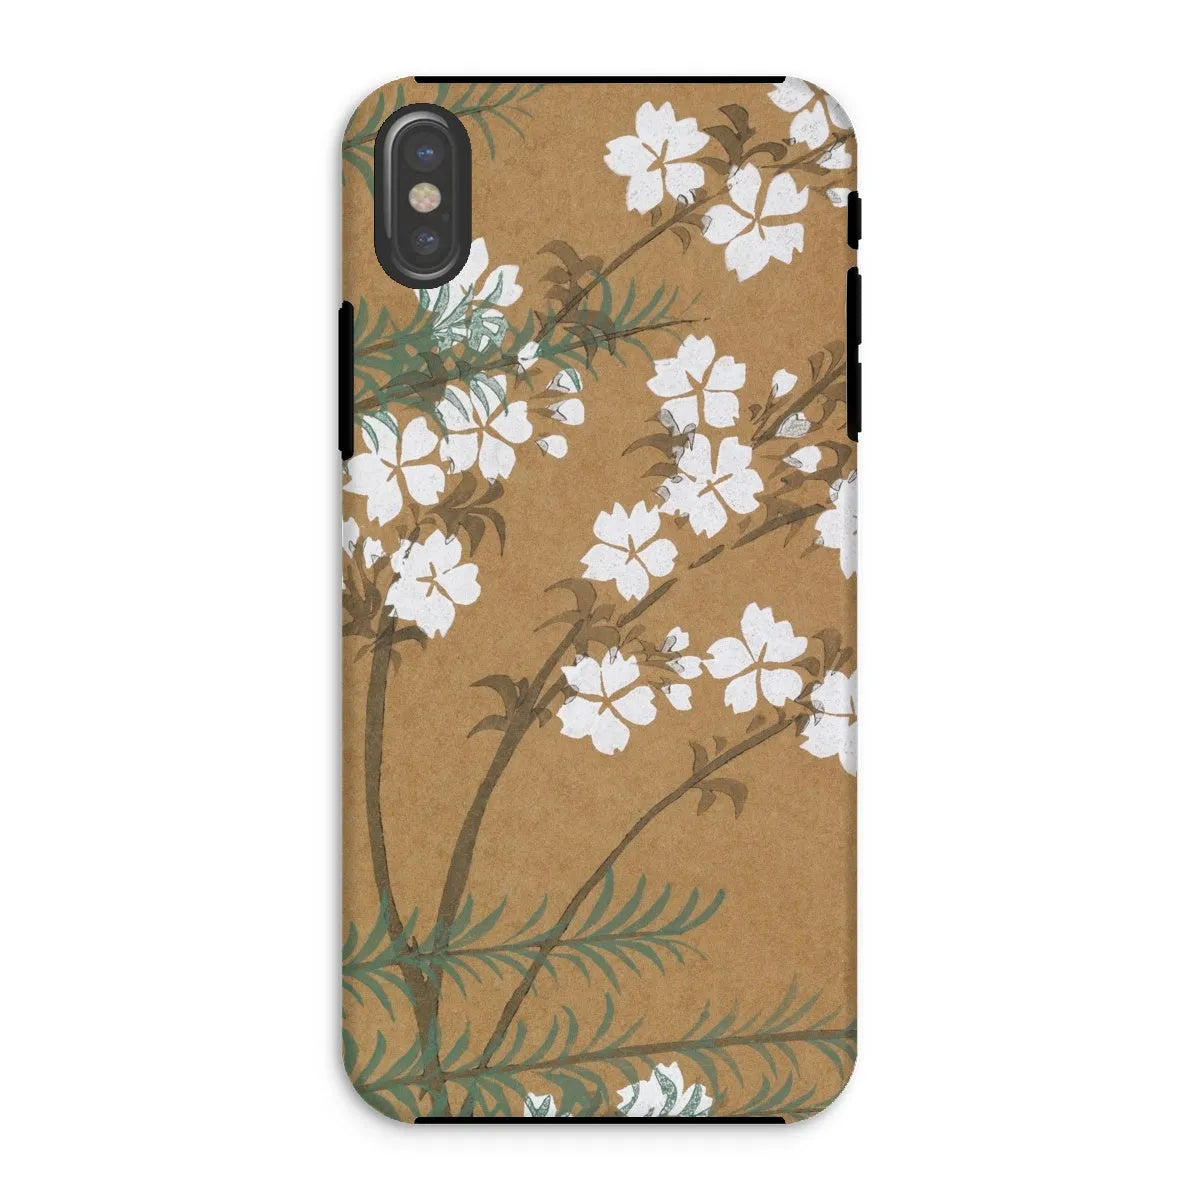 Blossoms From Momoyogusa Floral Phone Case - Kamisaka Sekka - Iphone Xs / Matte - Mobile Phone Cases - Aesthetic Art